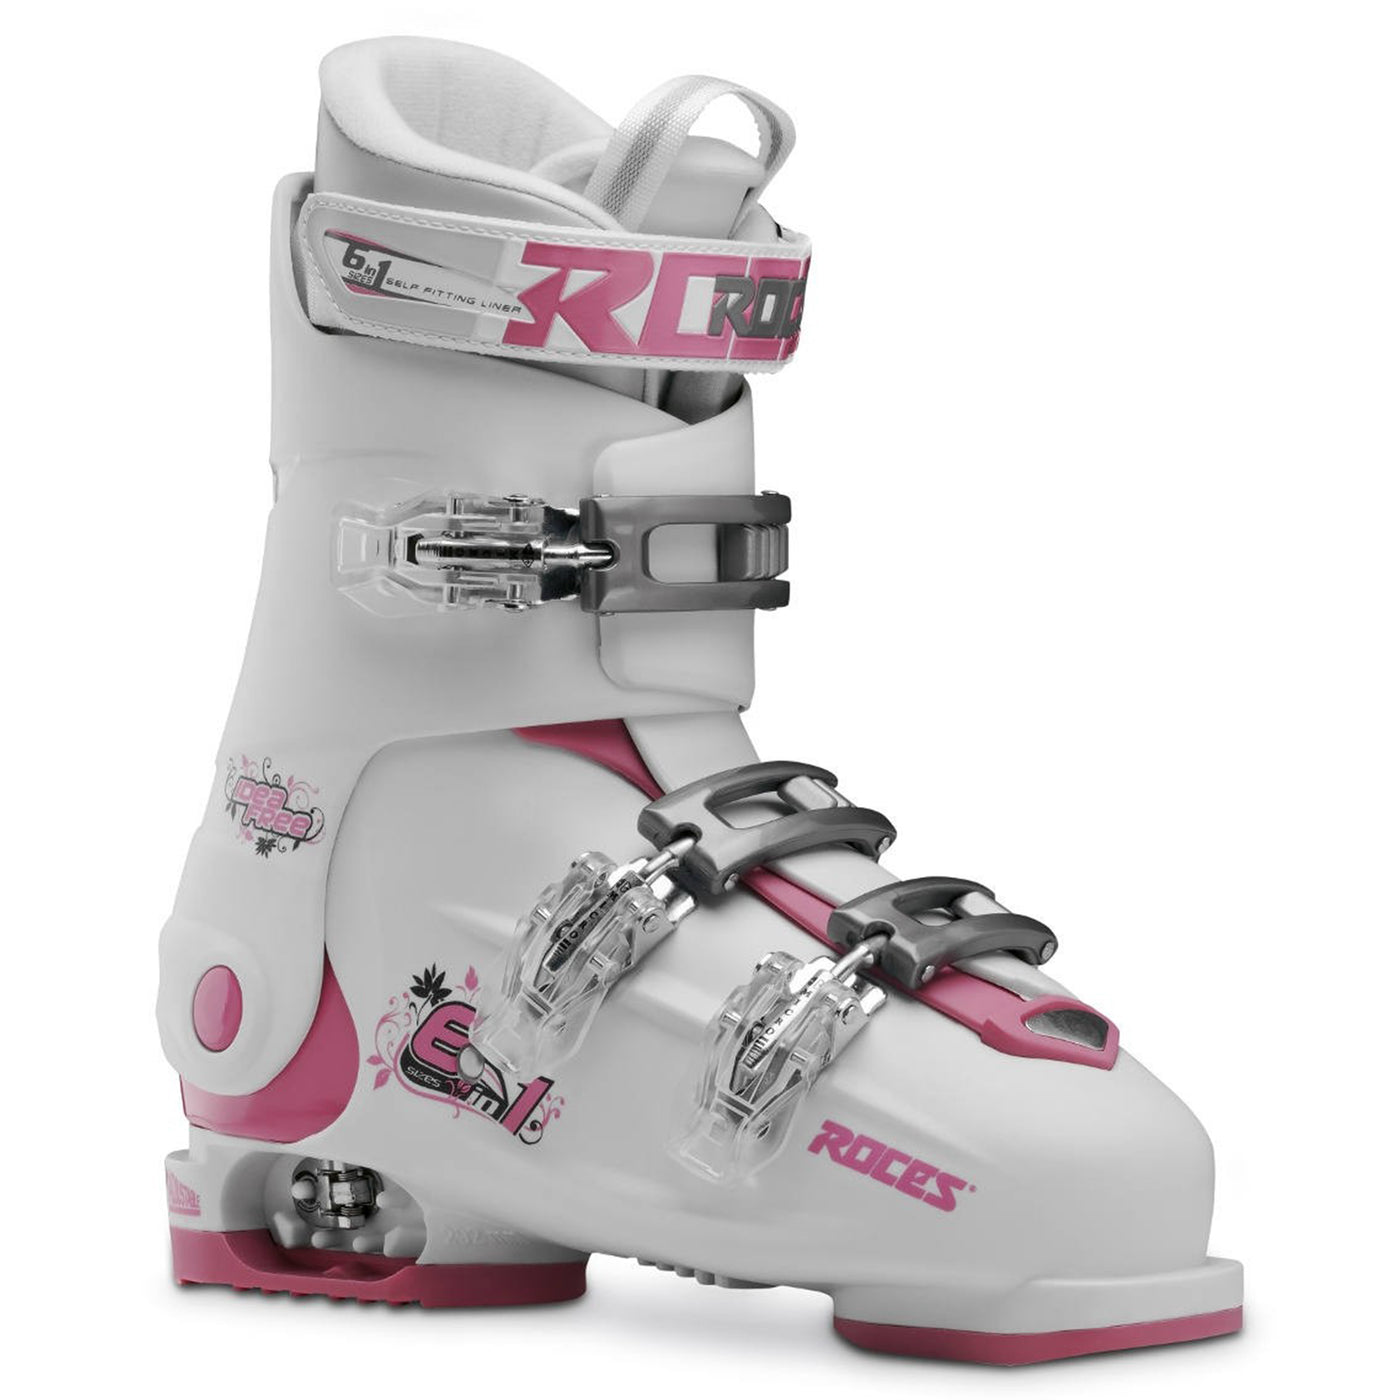 Roces IDEA Free Adjustable Youth Ski Boots | Size 22.5 - 25.5 MP SKI BOOTS Roces White/Deep Pink  